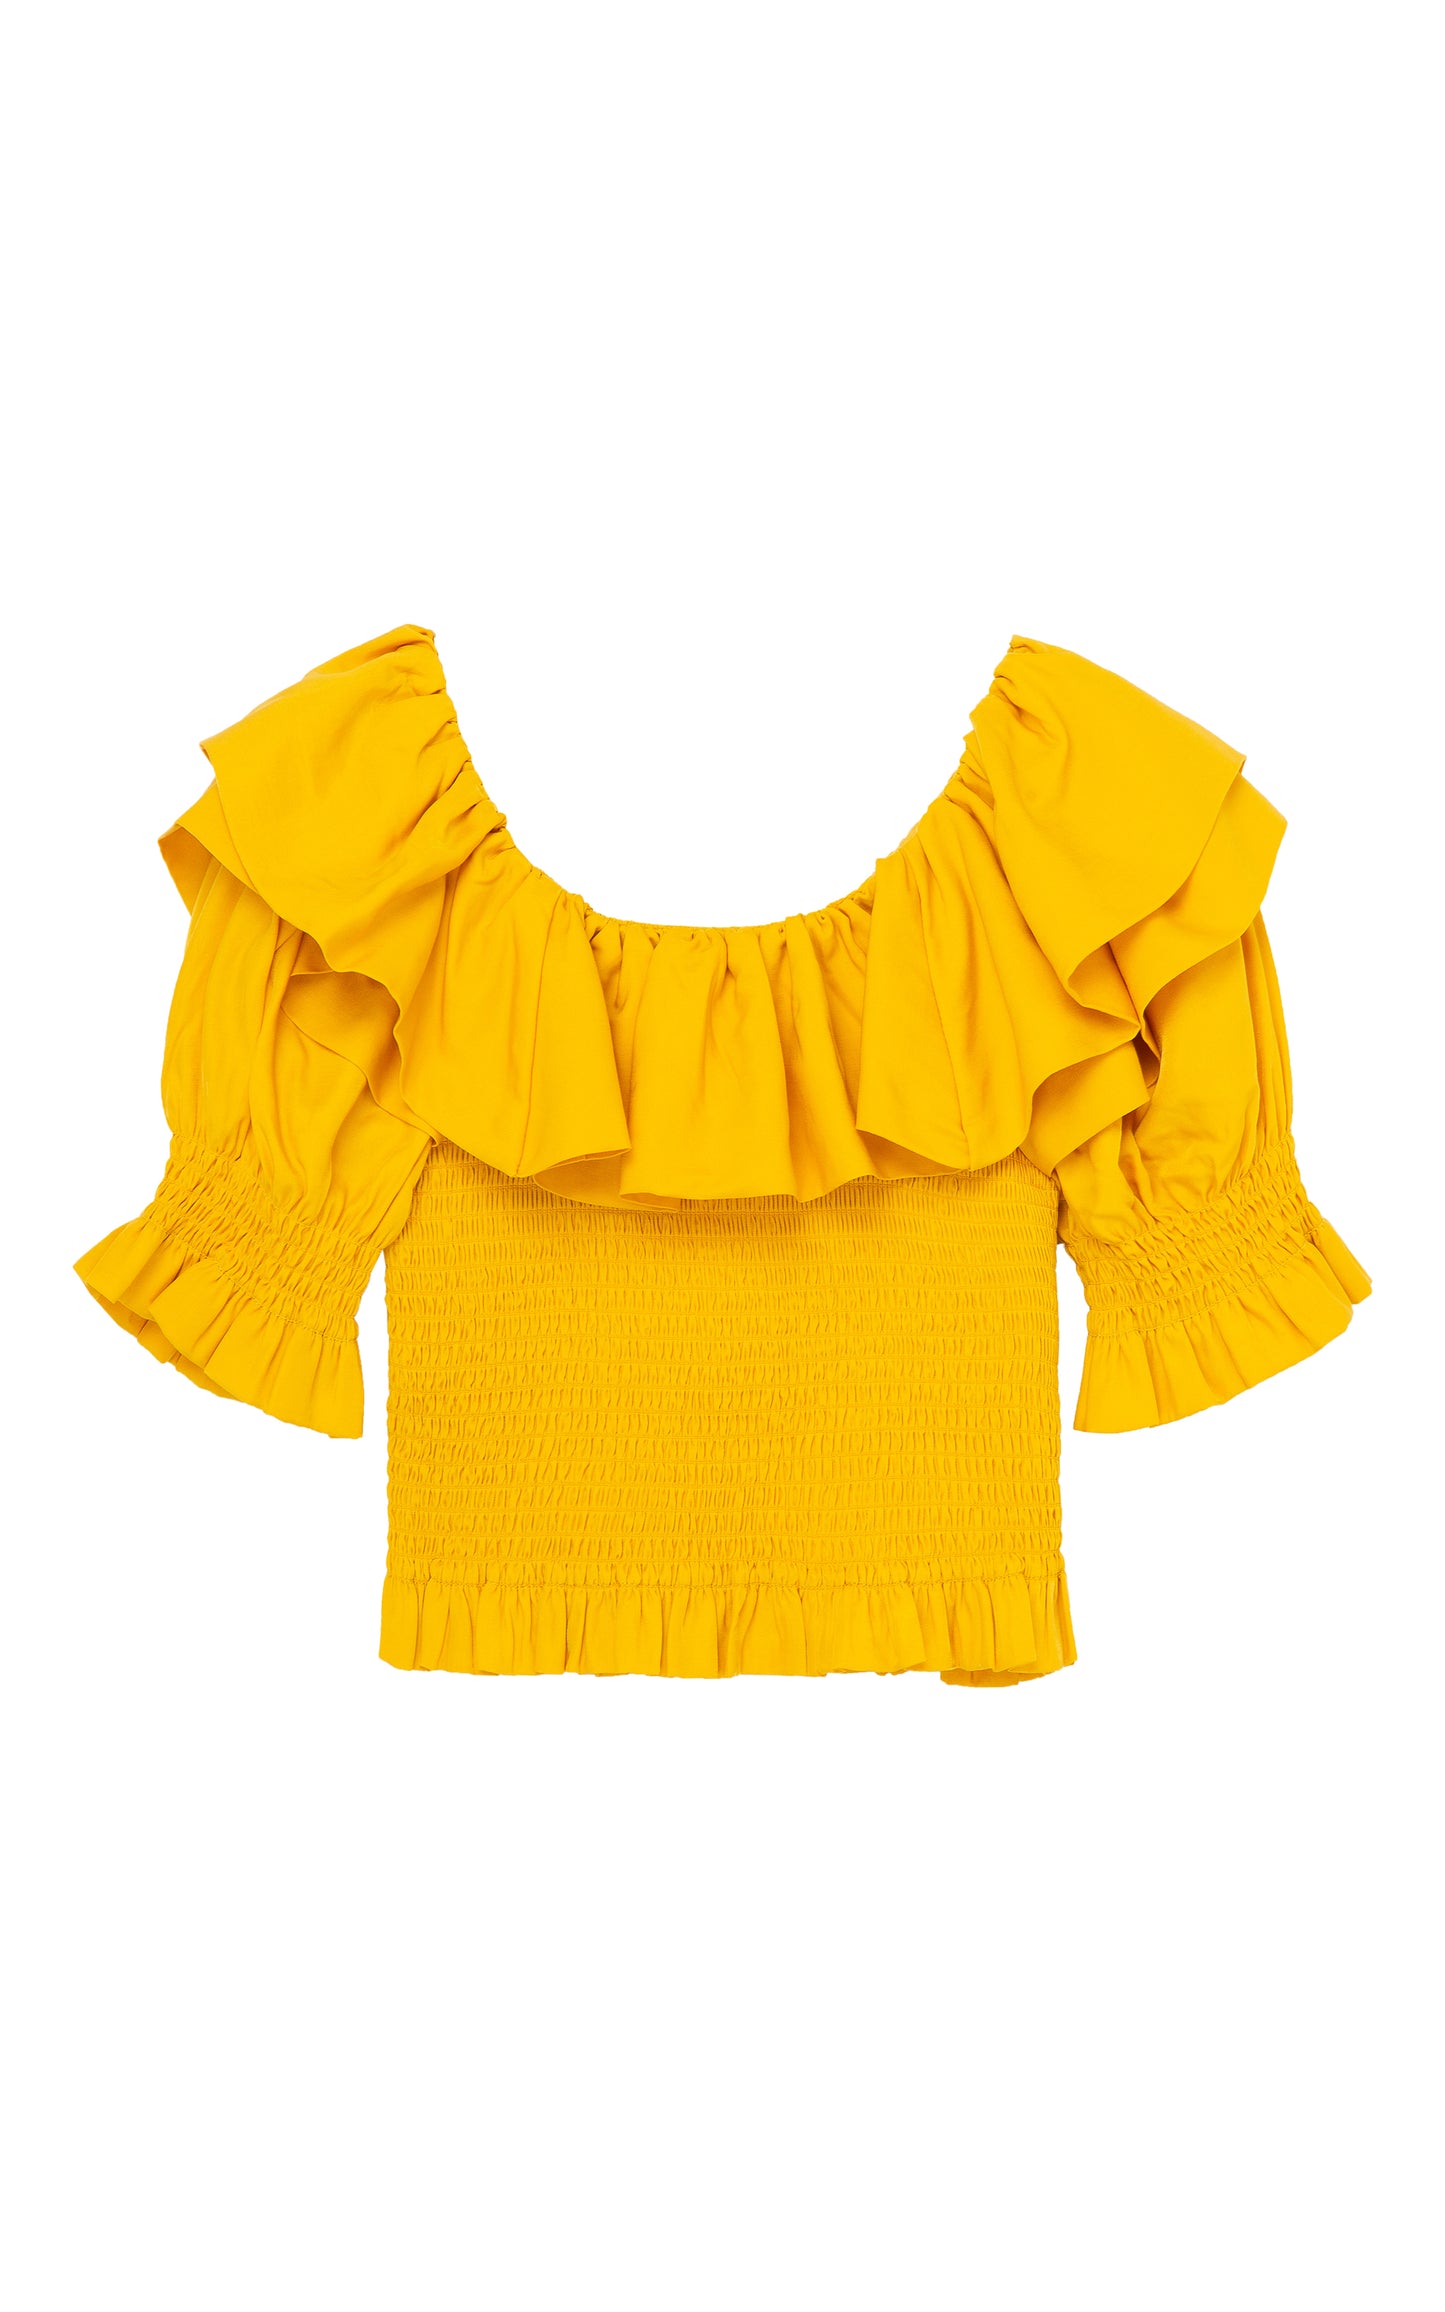 YELLOW THREE-QUARTER-LENGTH SLEEVE TOP WITH A WIDE RUFFLED NECKLINE AND A SMOCKED BODICE